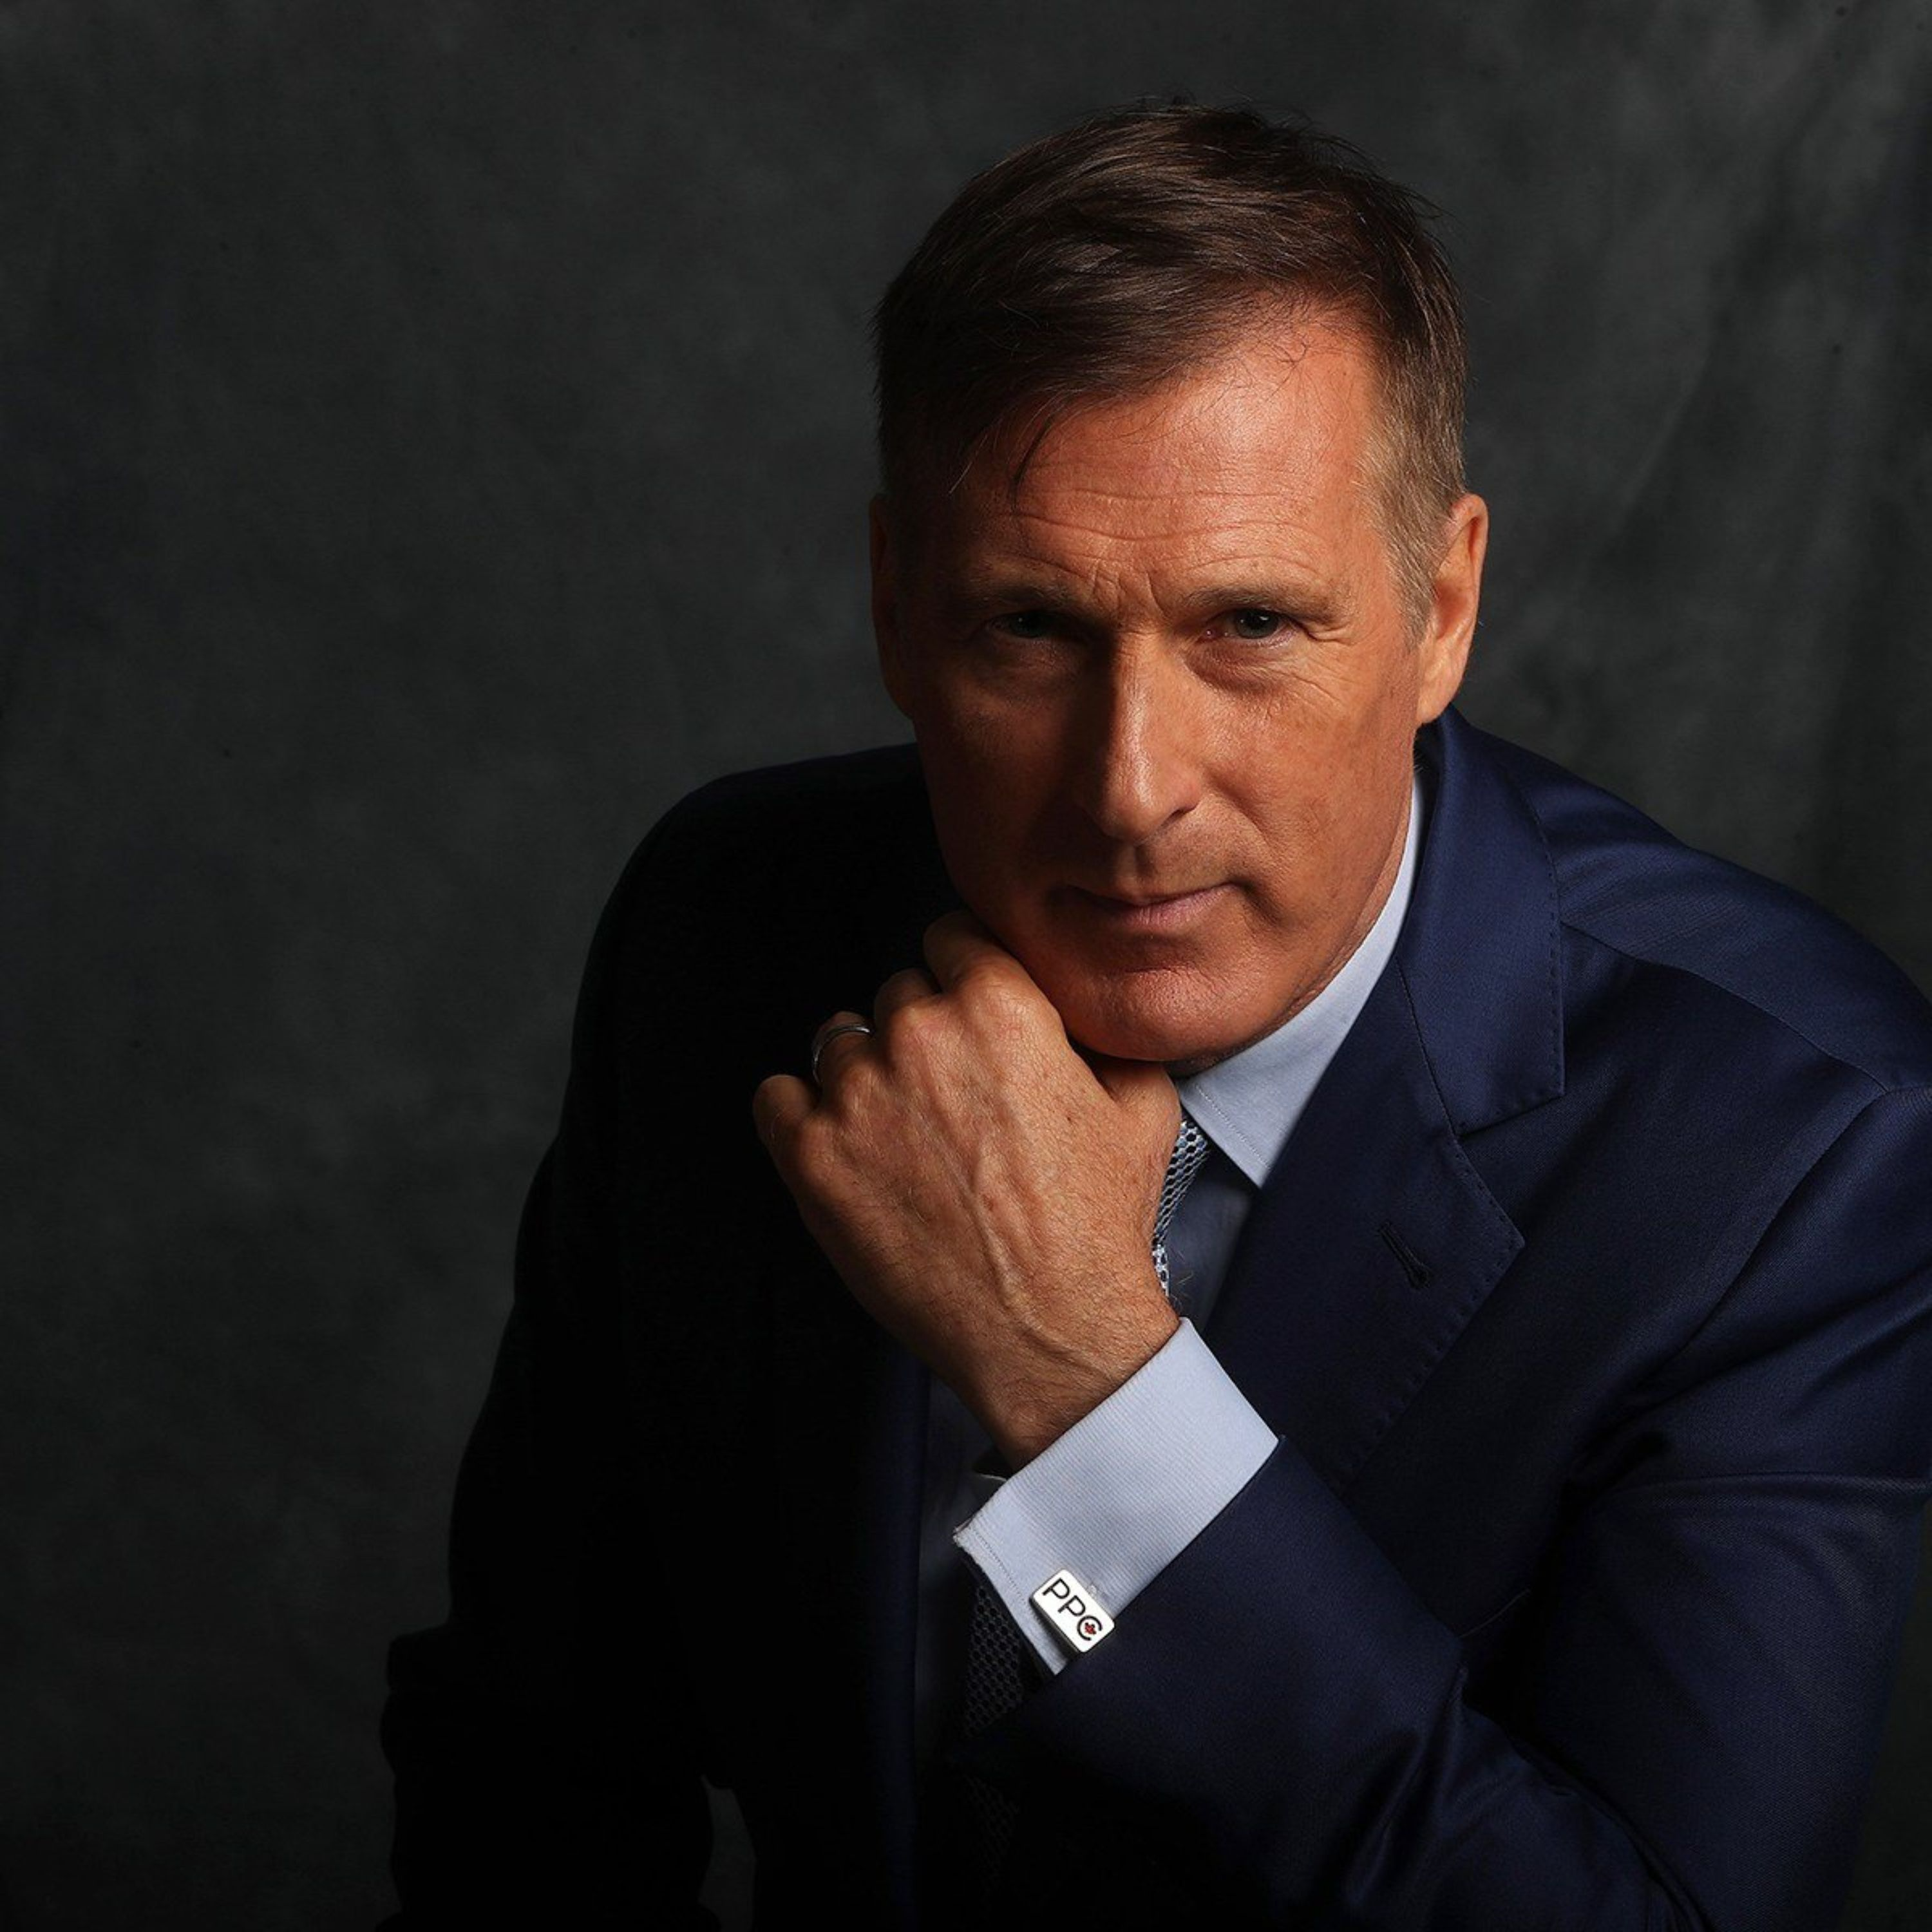 EP550: The Honorable Maxime Bernier - Believe In People, Not Government